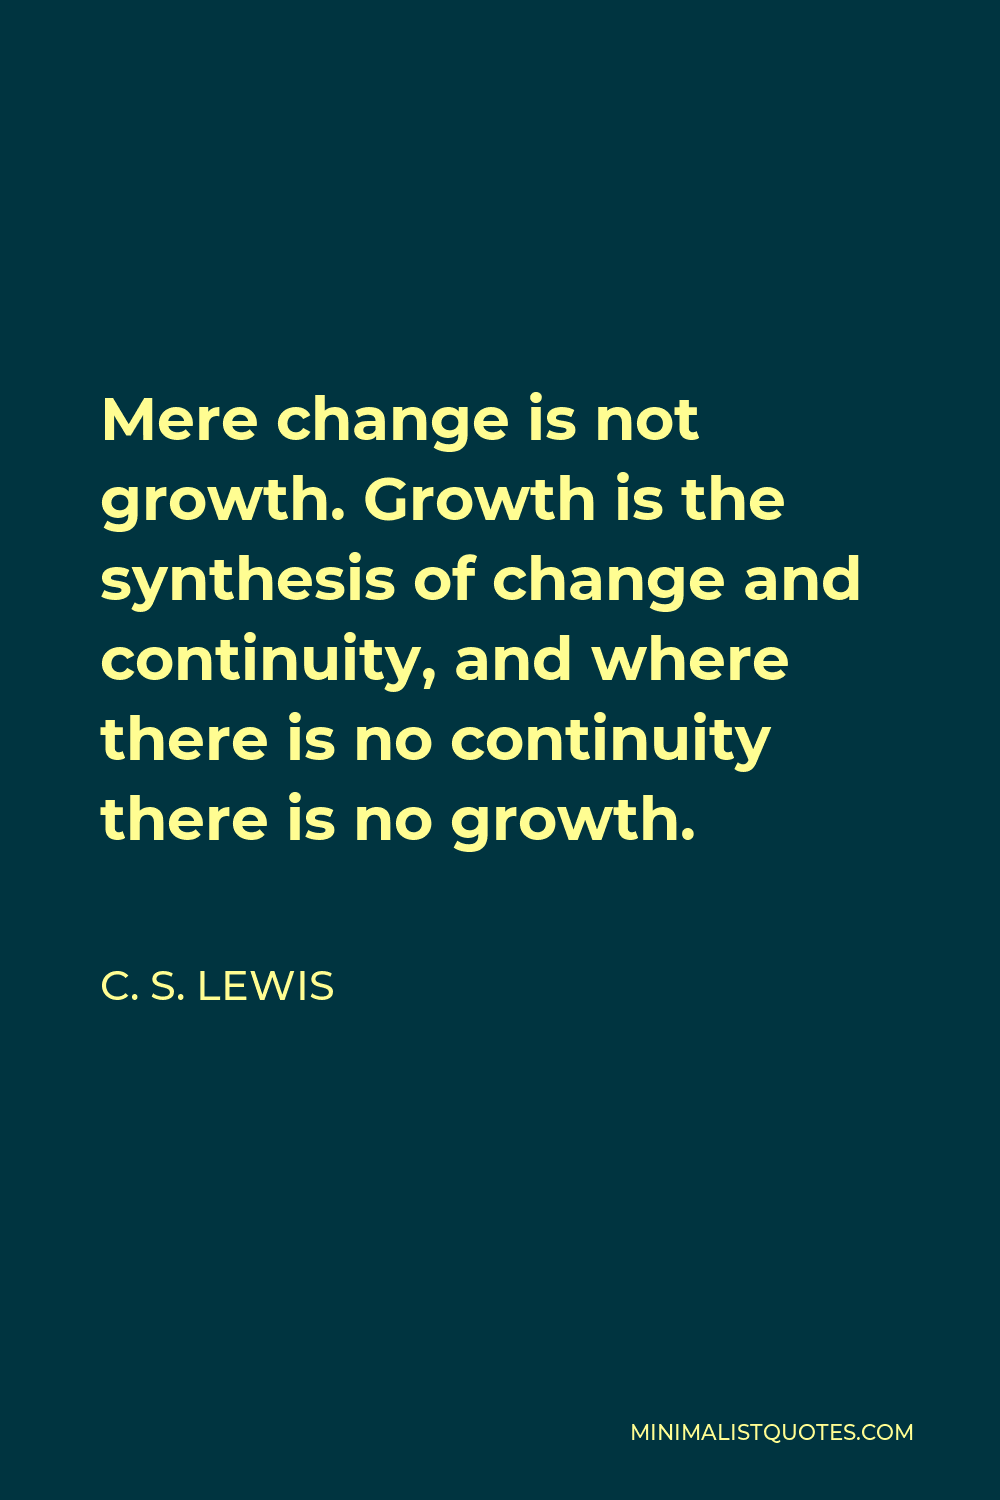 C. S. Lewis Quote - Mere change is not growth. Growth is the synthesis of change and continuity, and where there is no continuity there is no growth.